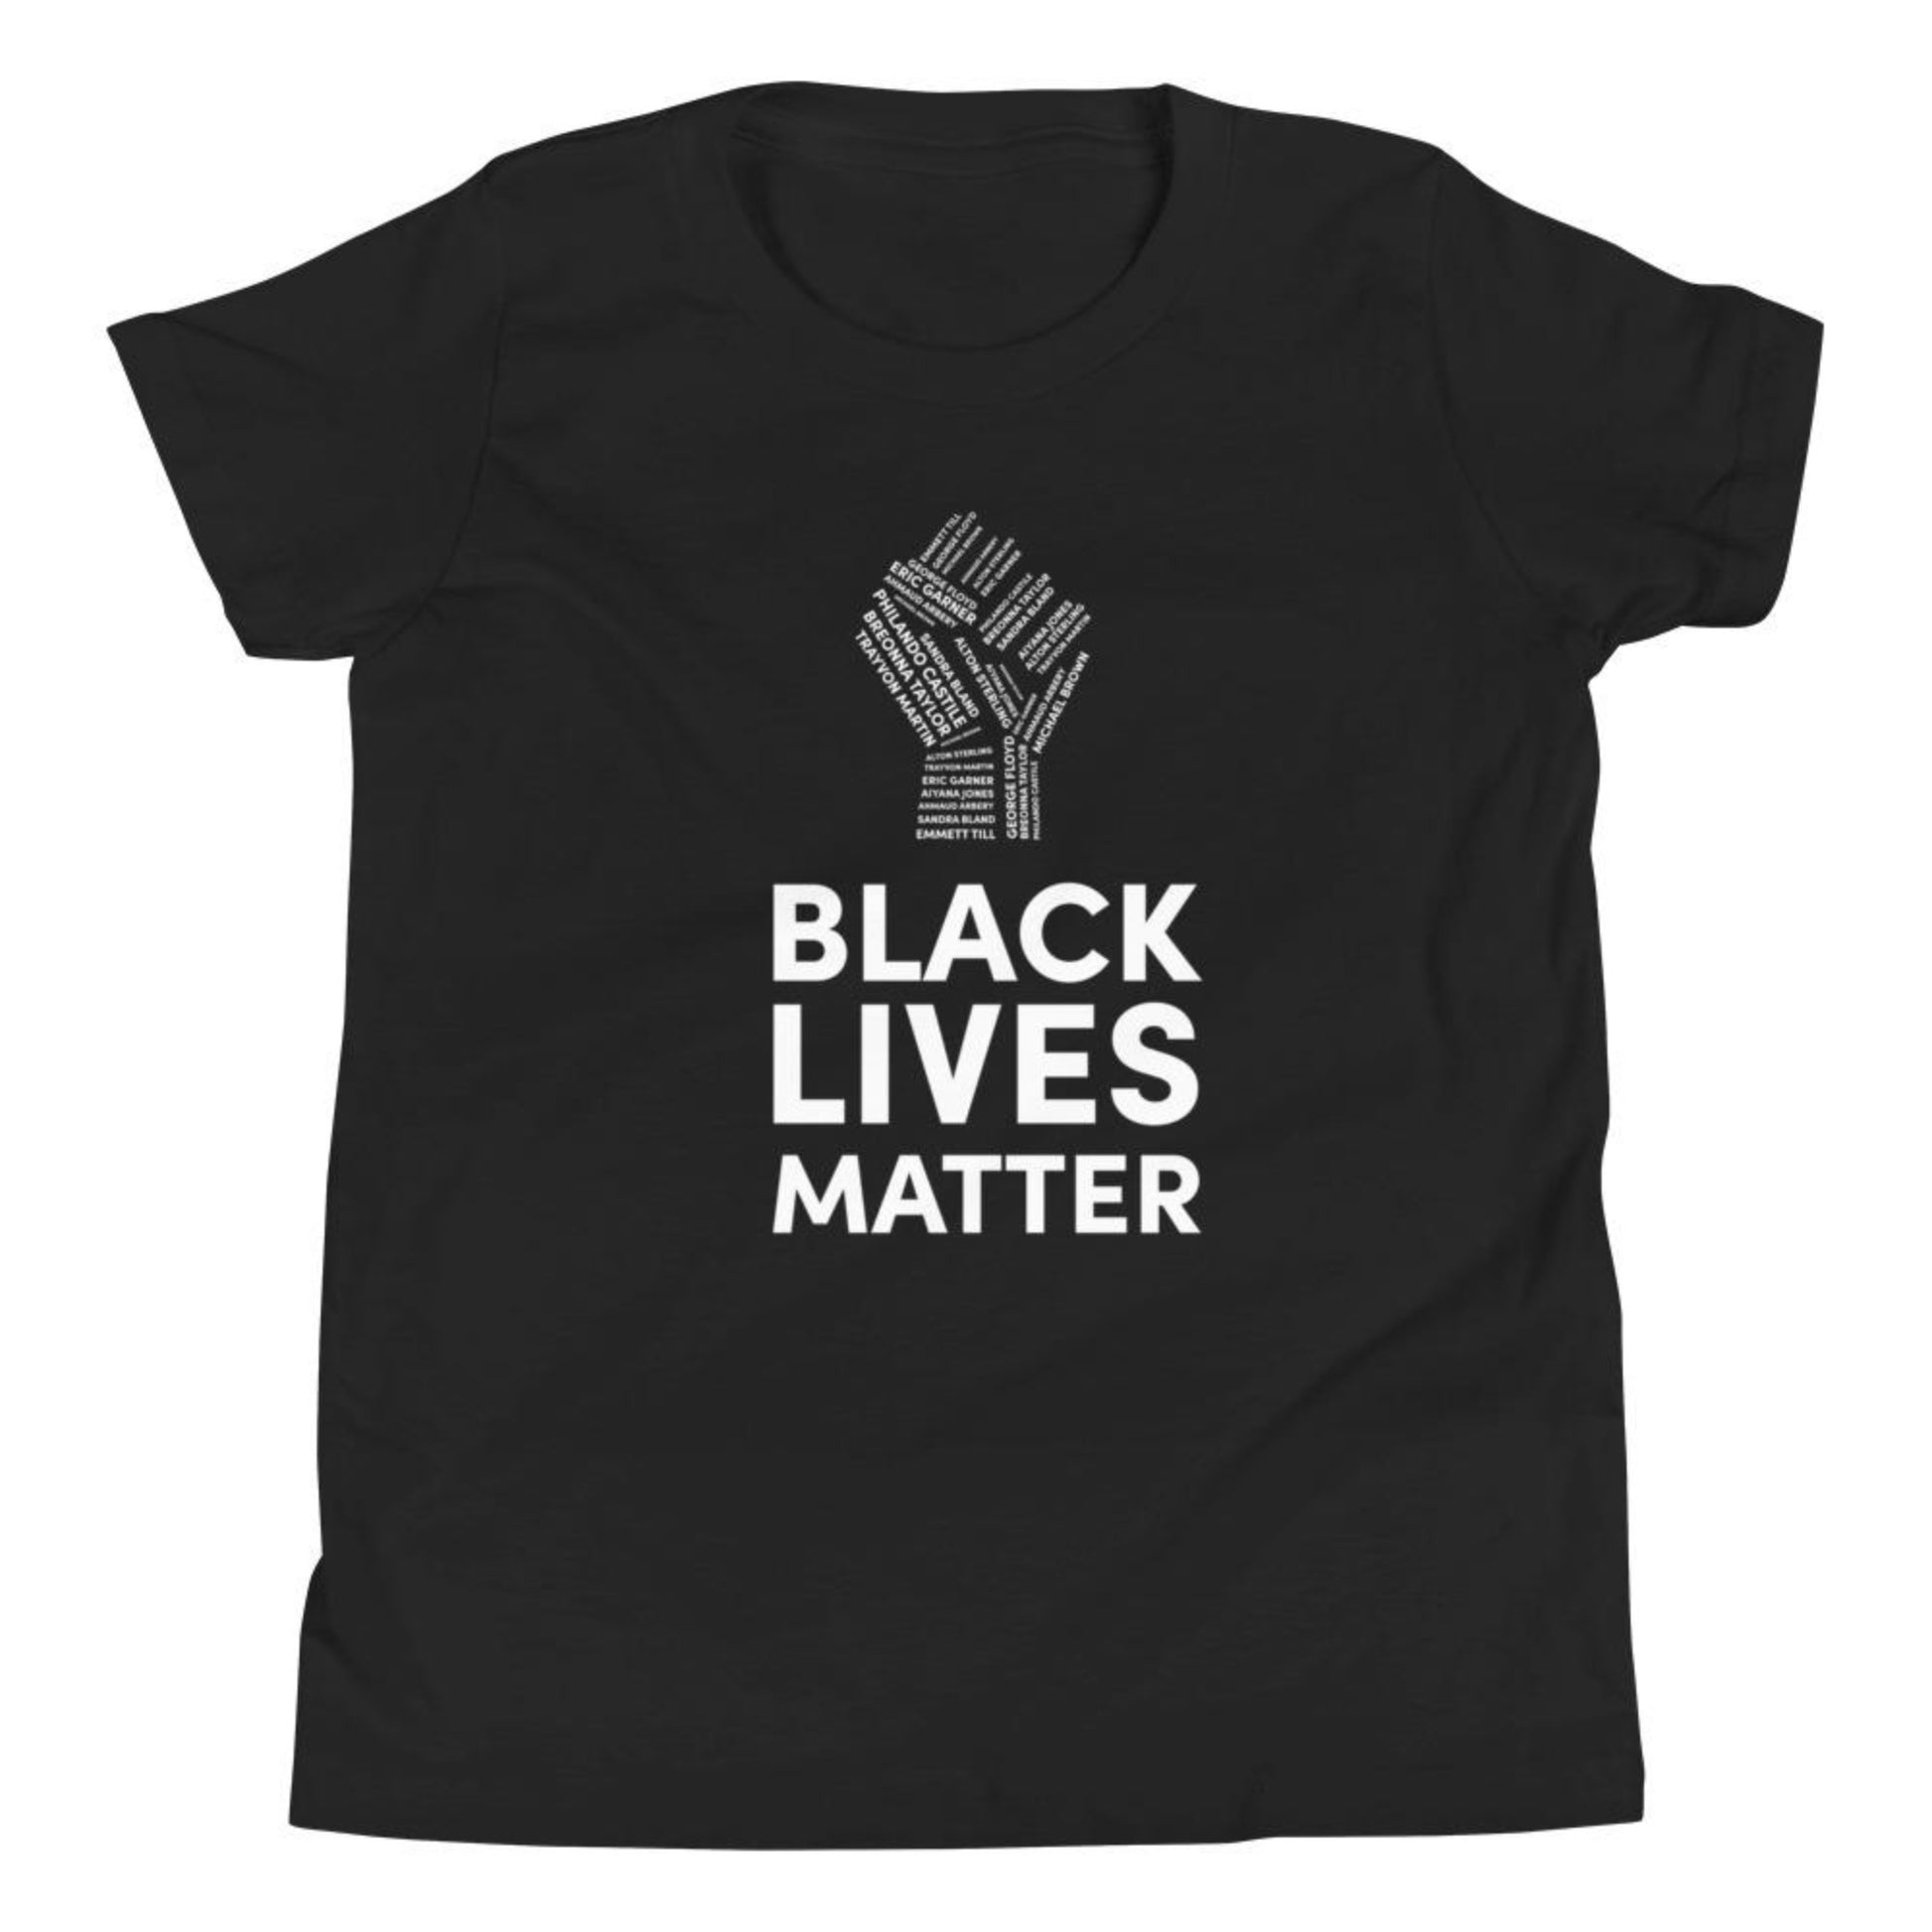 kid's black cotton t-shirt with black lives matter and a fist printed in white on the front